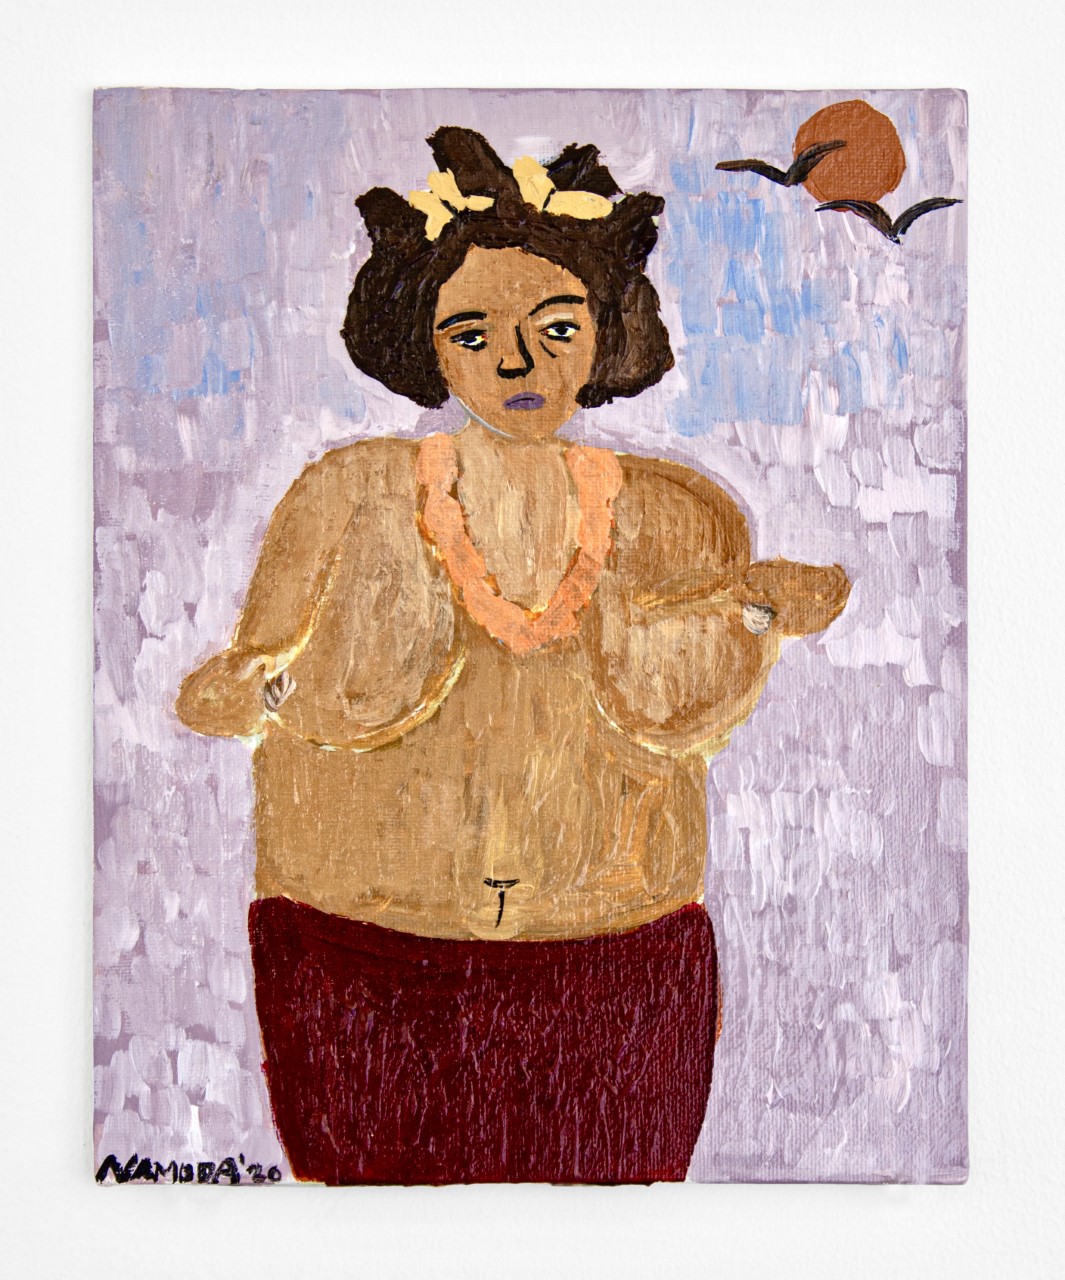 Cassi Namoda, 'Nouricce of Negus, from Abysinnia, posing by the moonlight,' 2020, Acrylic on canvas, 10 x 8 in.